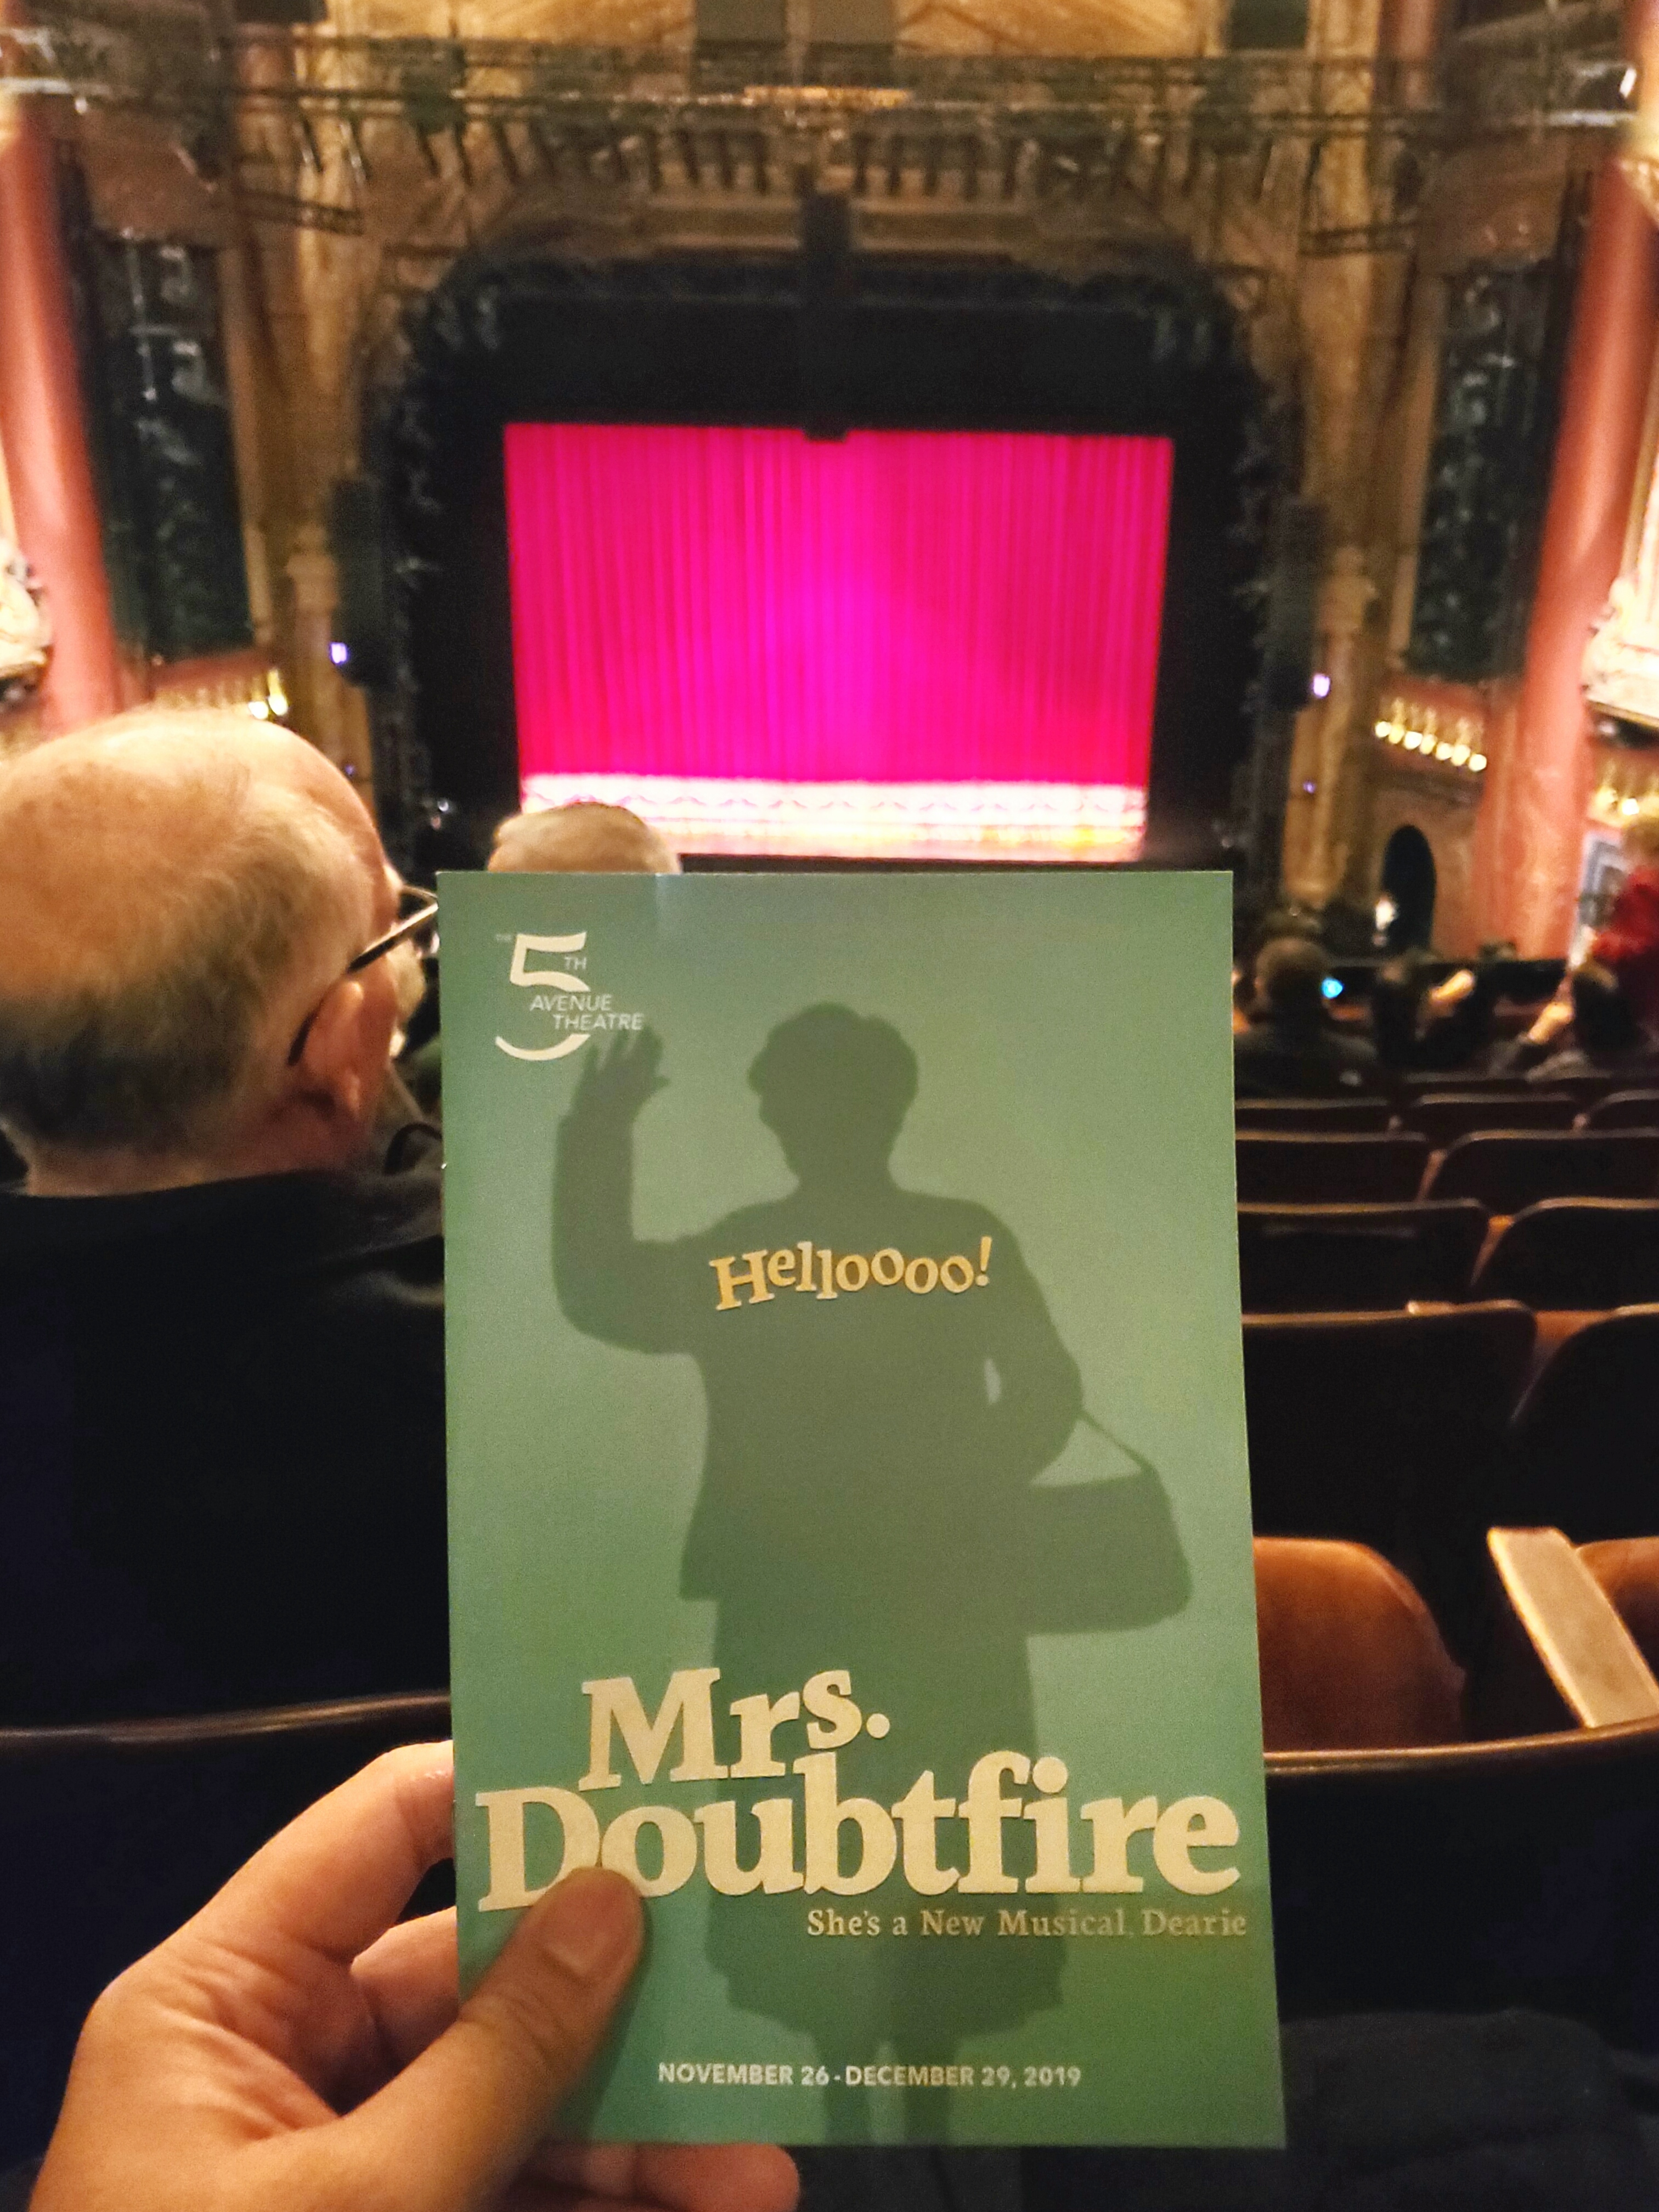 @DoubtfireBway at @The5thAvenueTheatre before it goes to #Broadway in spring 2020. #Hilarious stage #musical adaptation of the movie. Lead actor was crazy #talented.